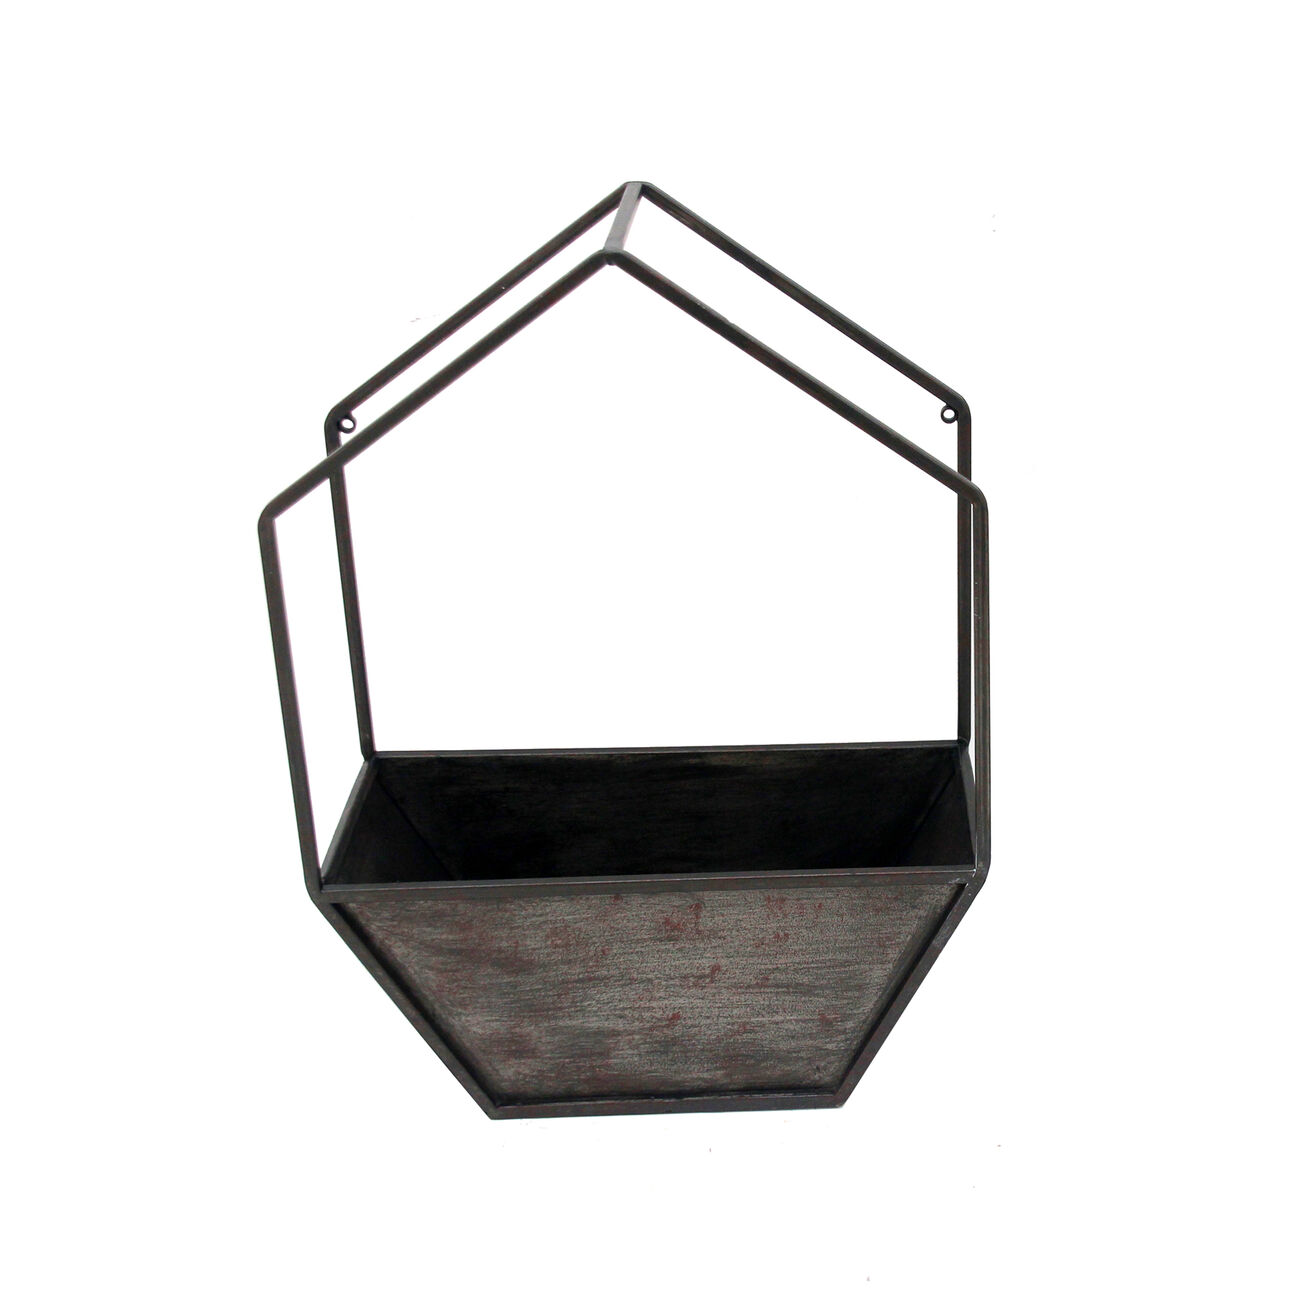 Heptagonal Metal Wall Planter with Wooden Case, Set of 2, Gray and Black